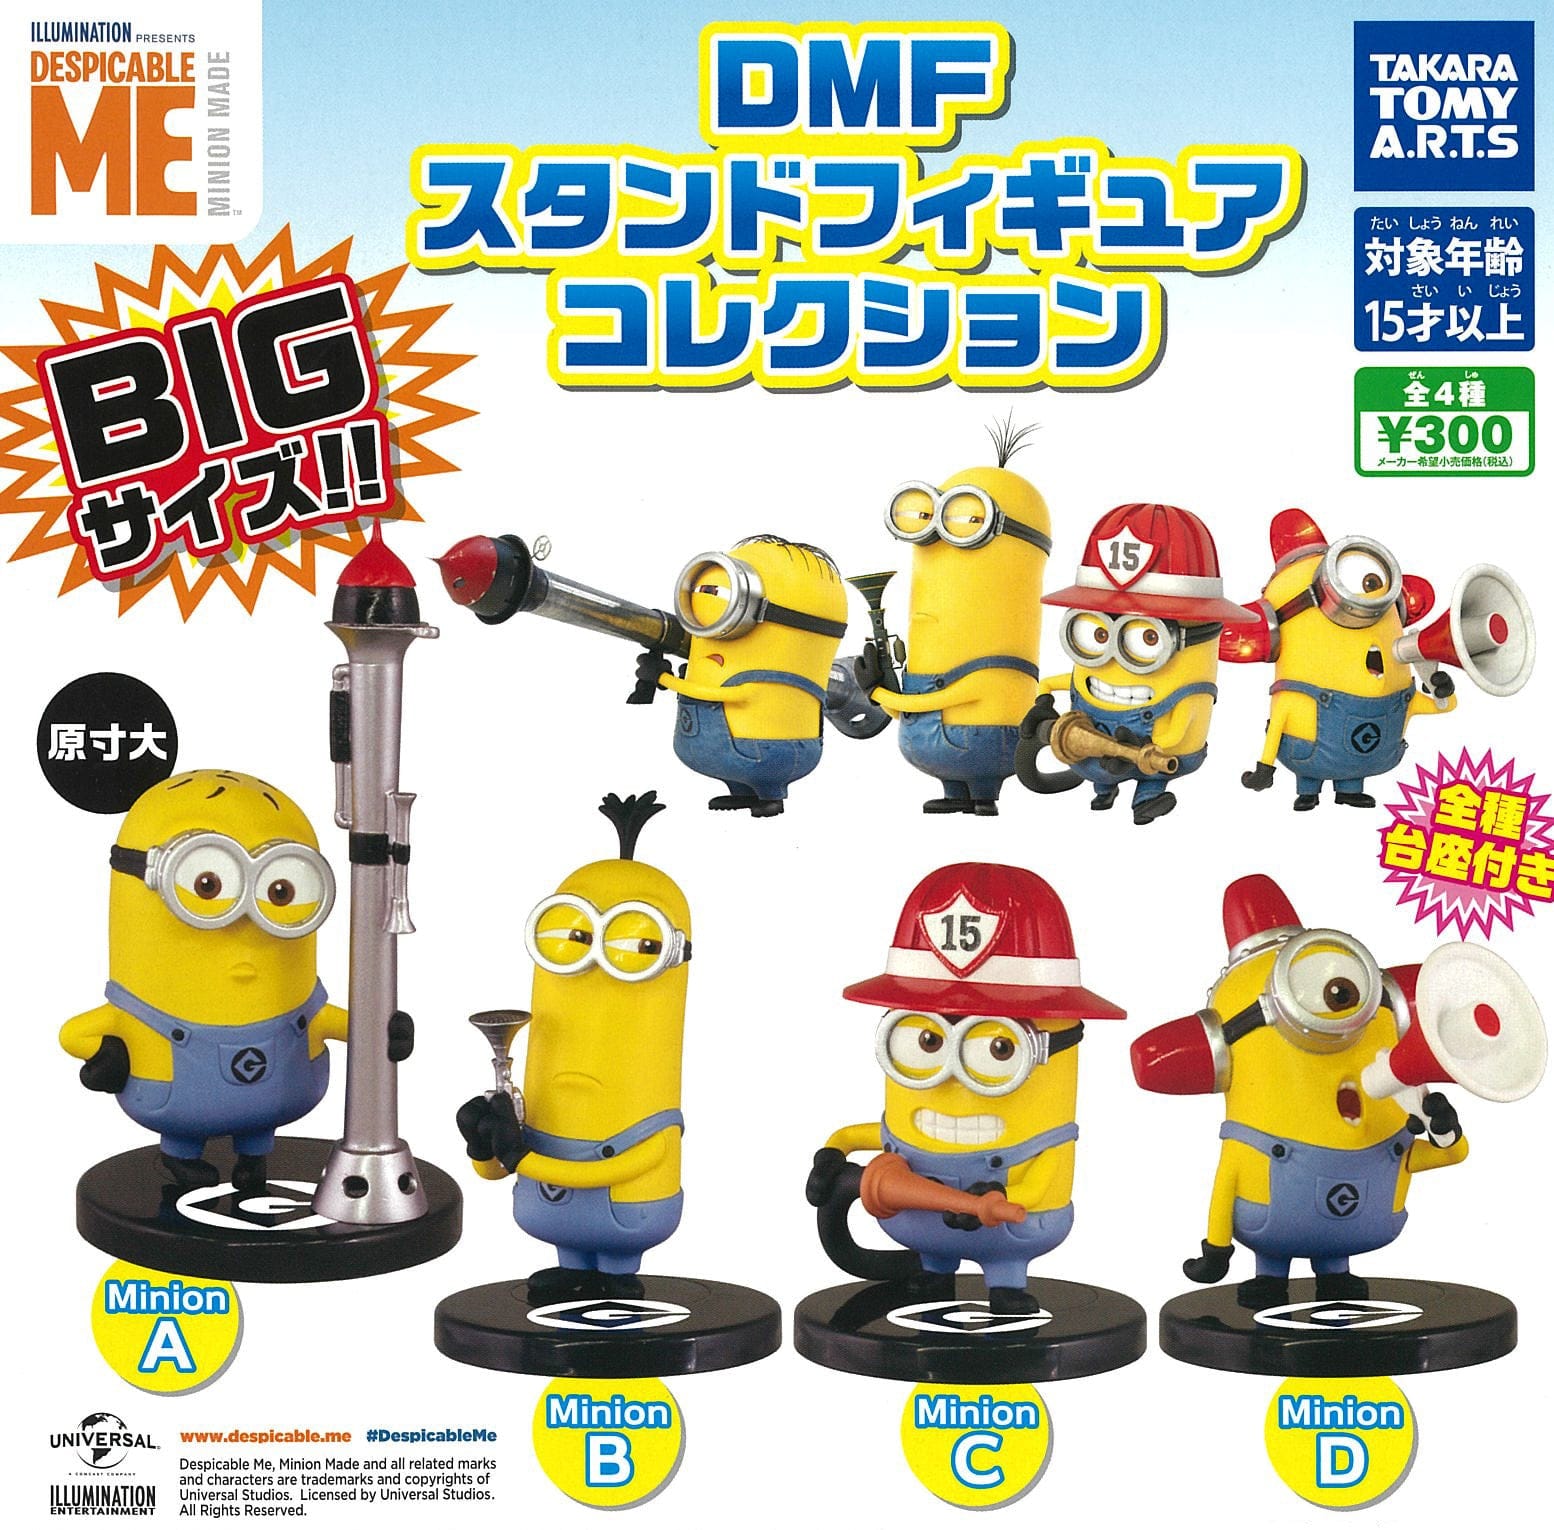 Takara Tomy A.R.T.S CP0245 - DMF Minions Stand Figure Collection - Complete Set